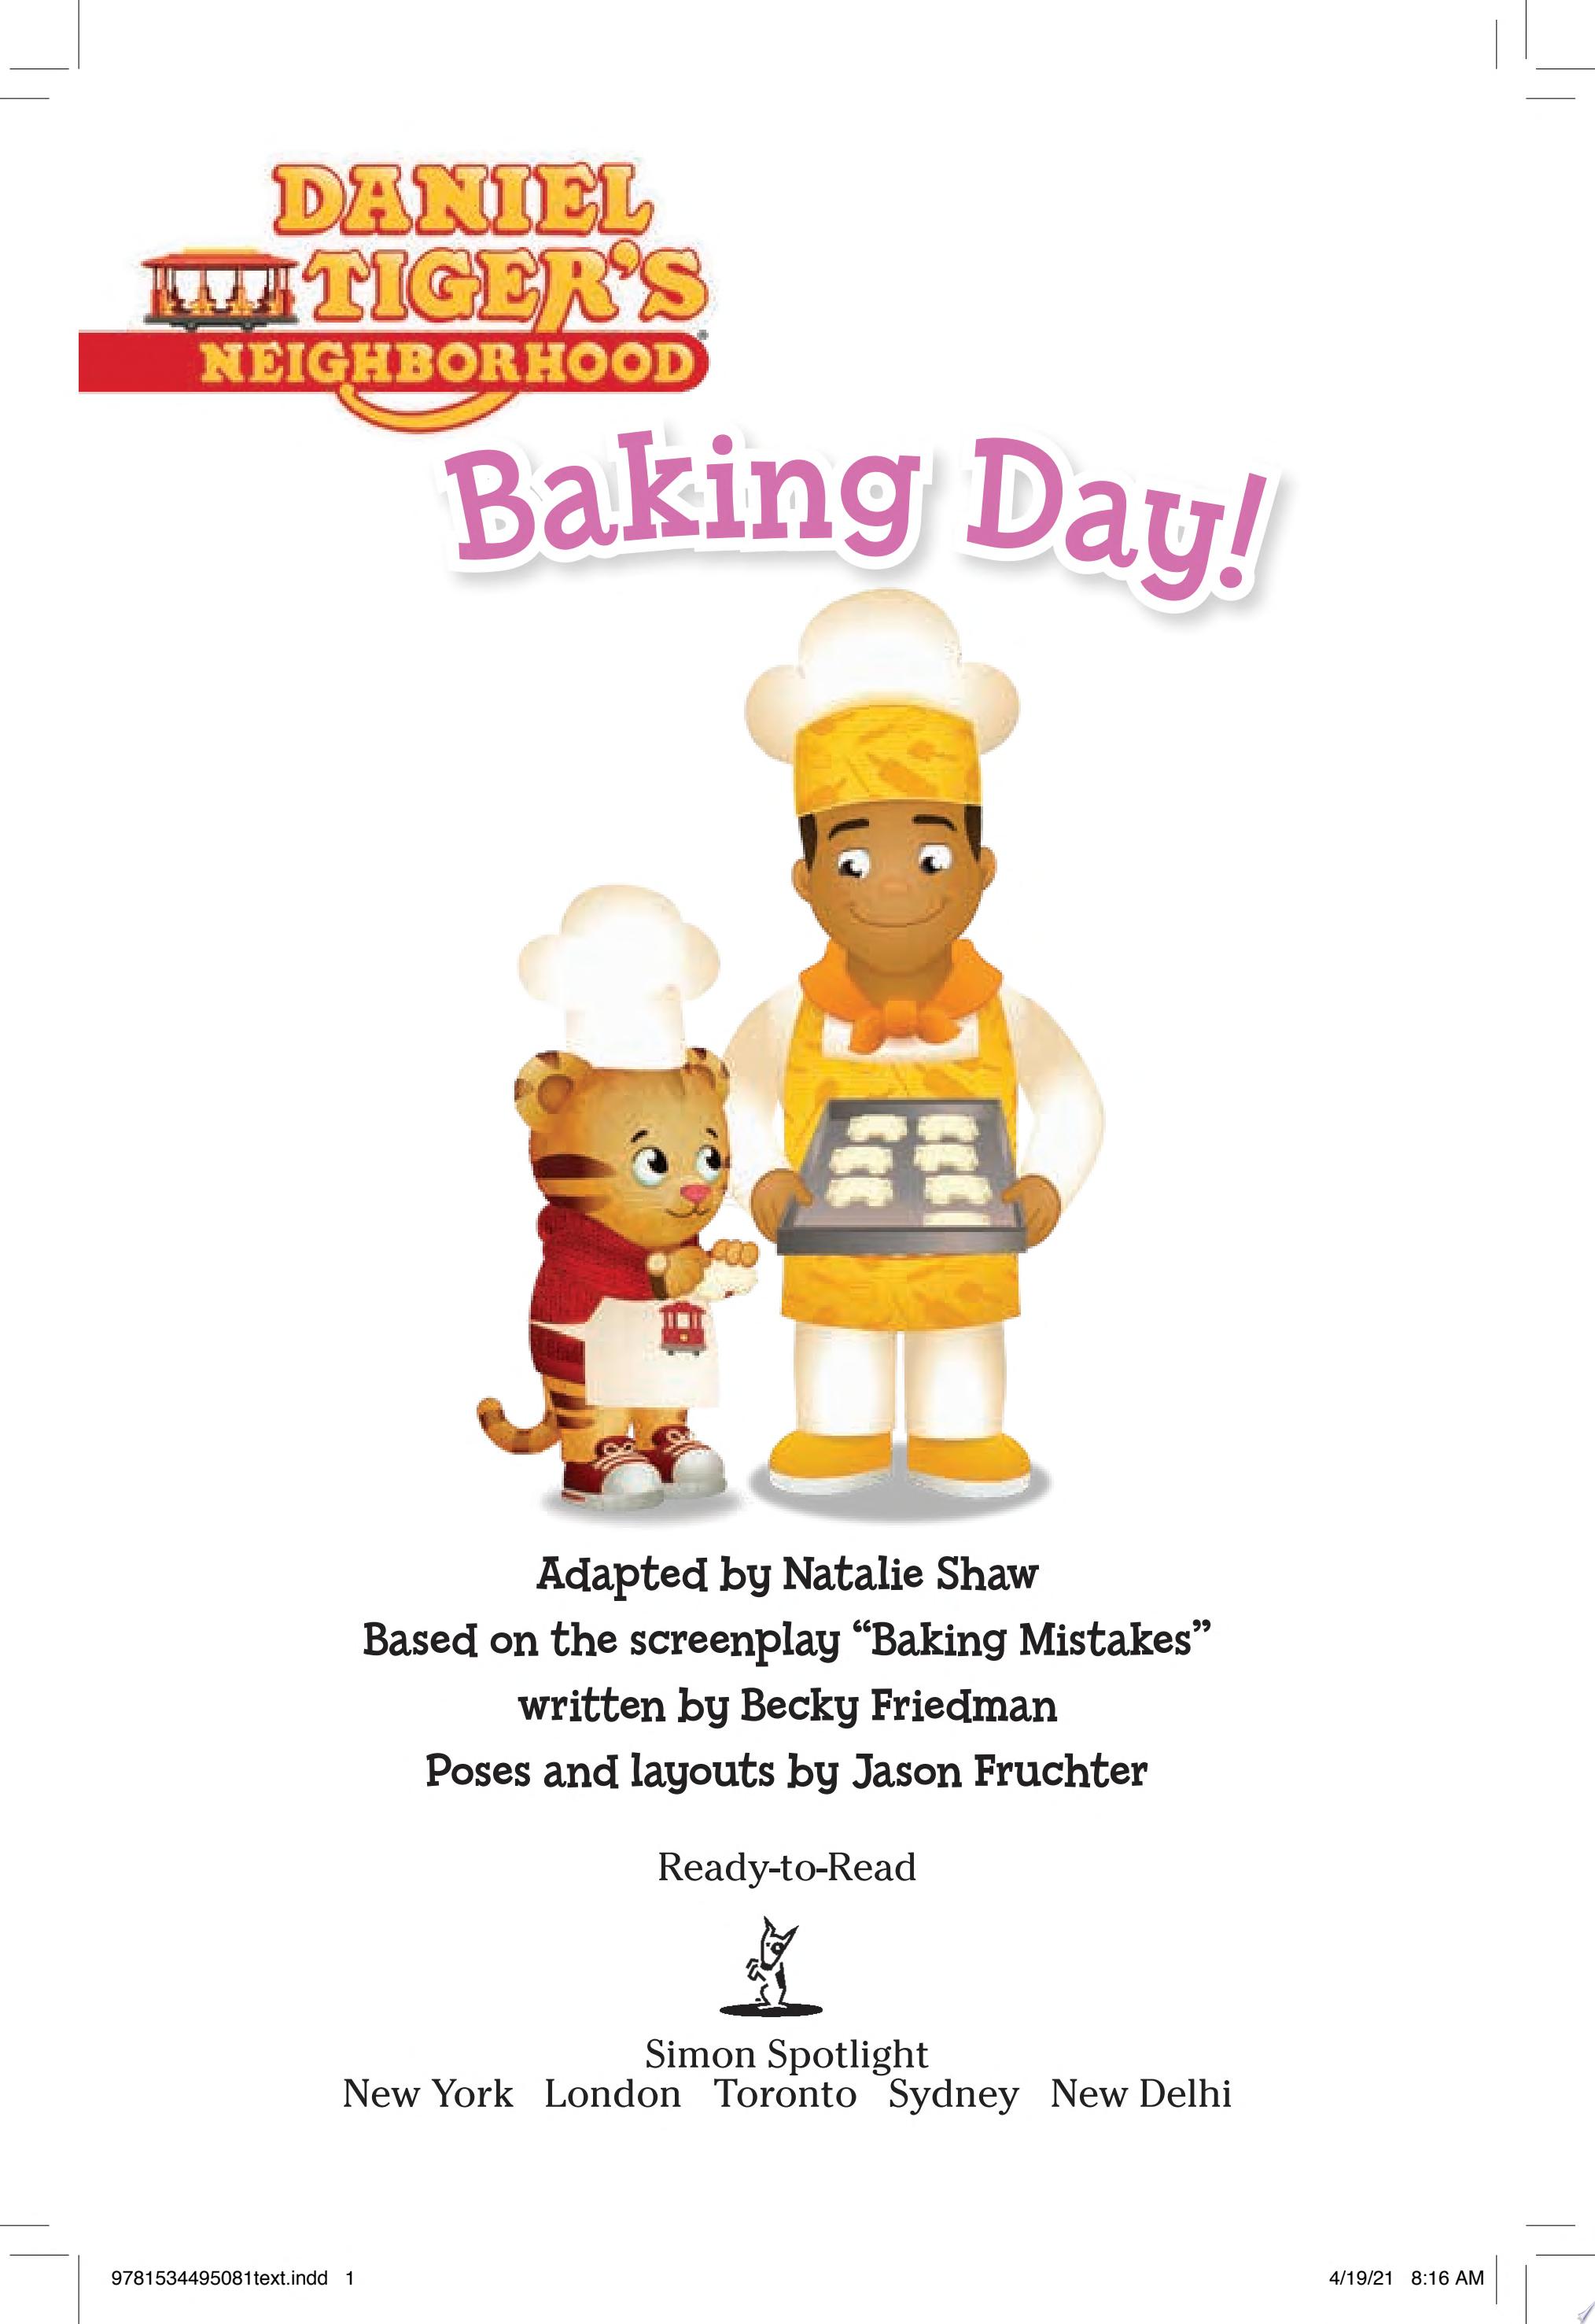 Image for "Baking Day!"